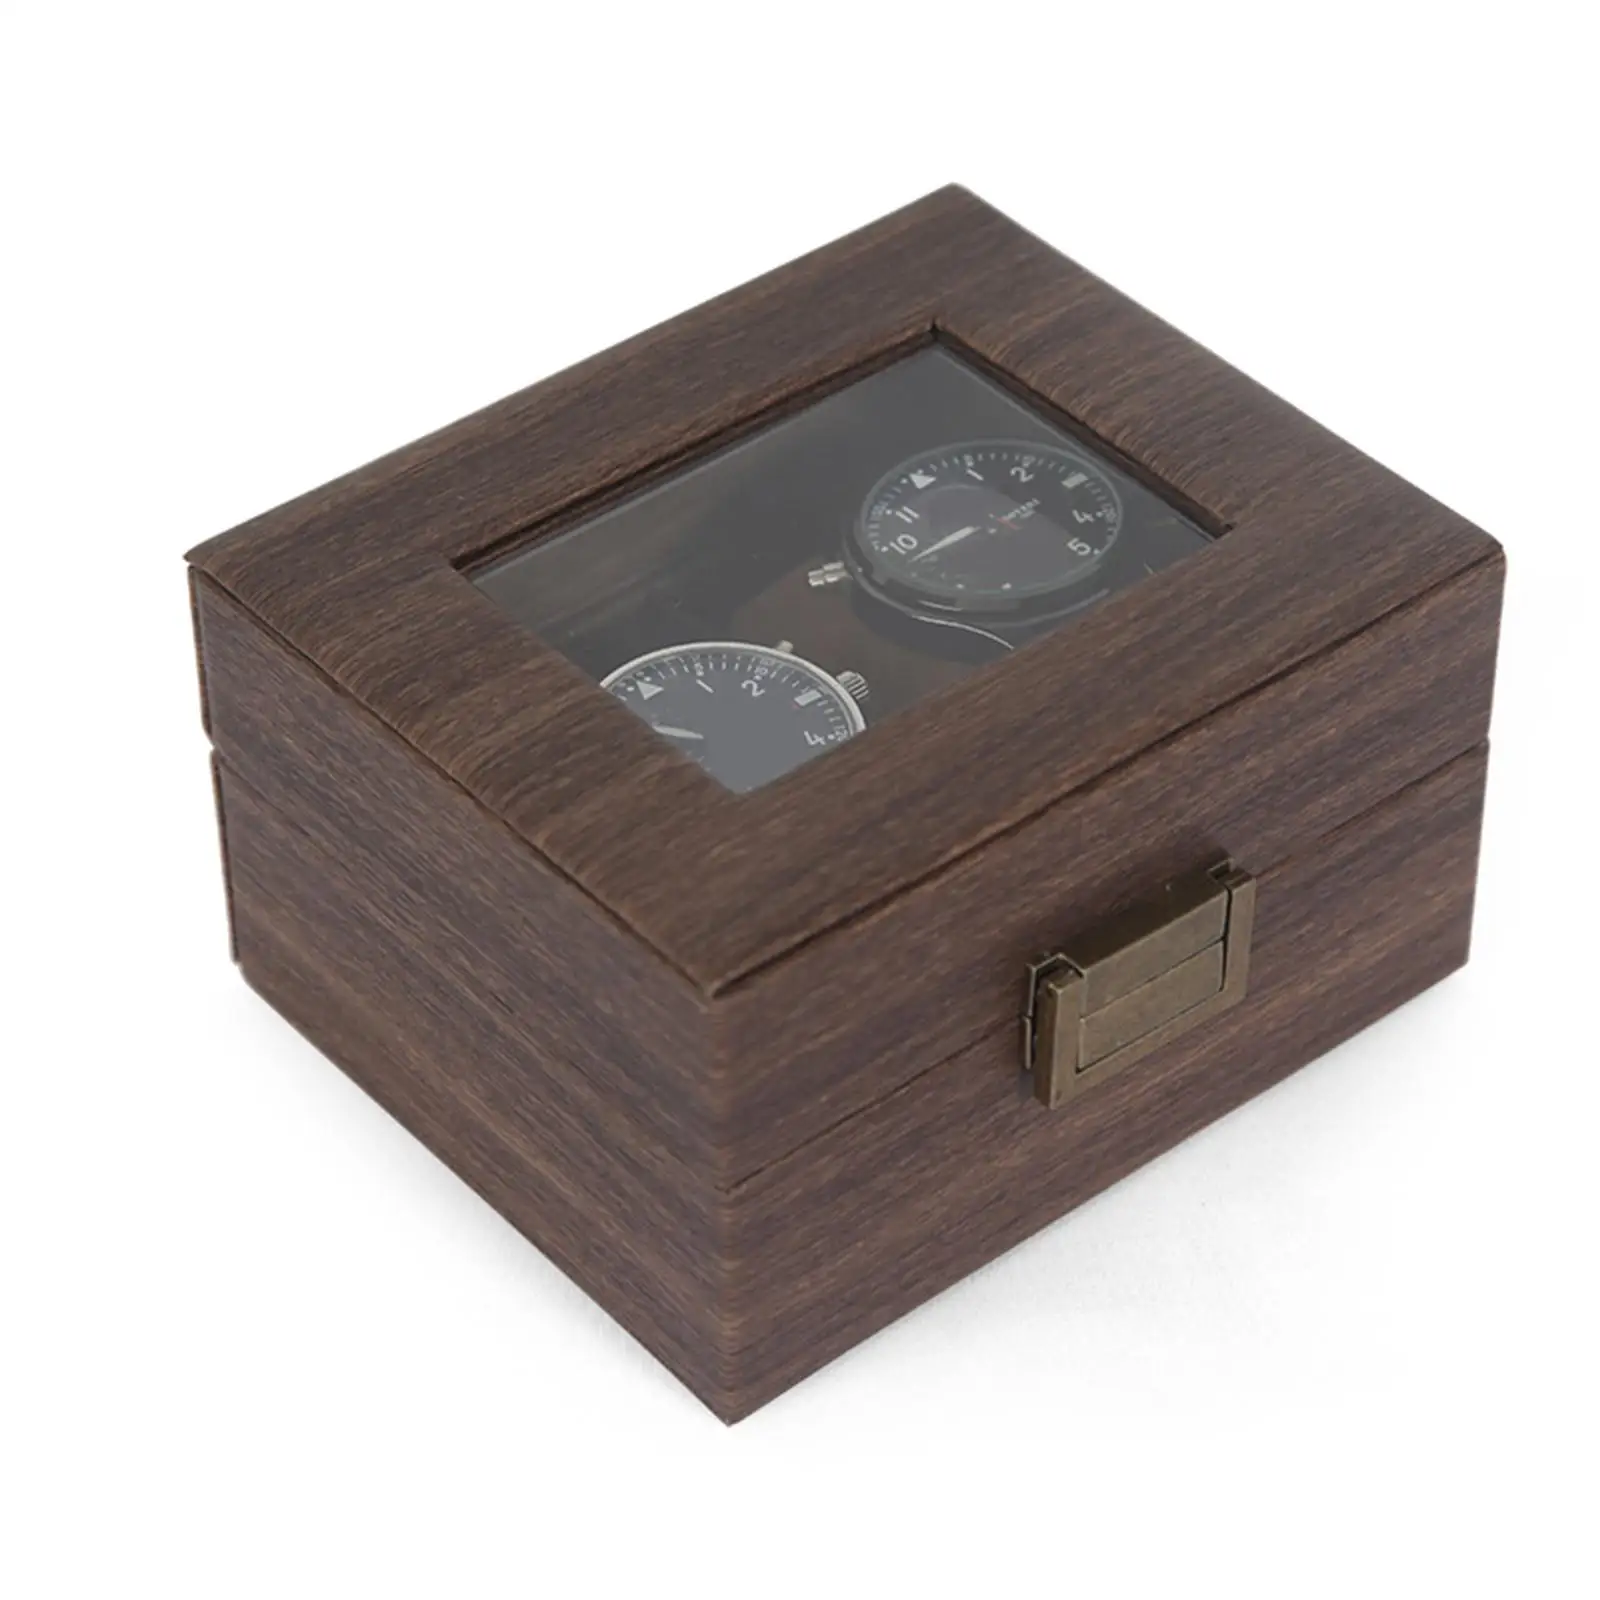 Watch Display Case Portable Wooden W/ Jewelry Organizer for Gifts